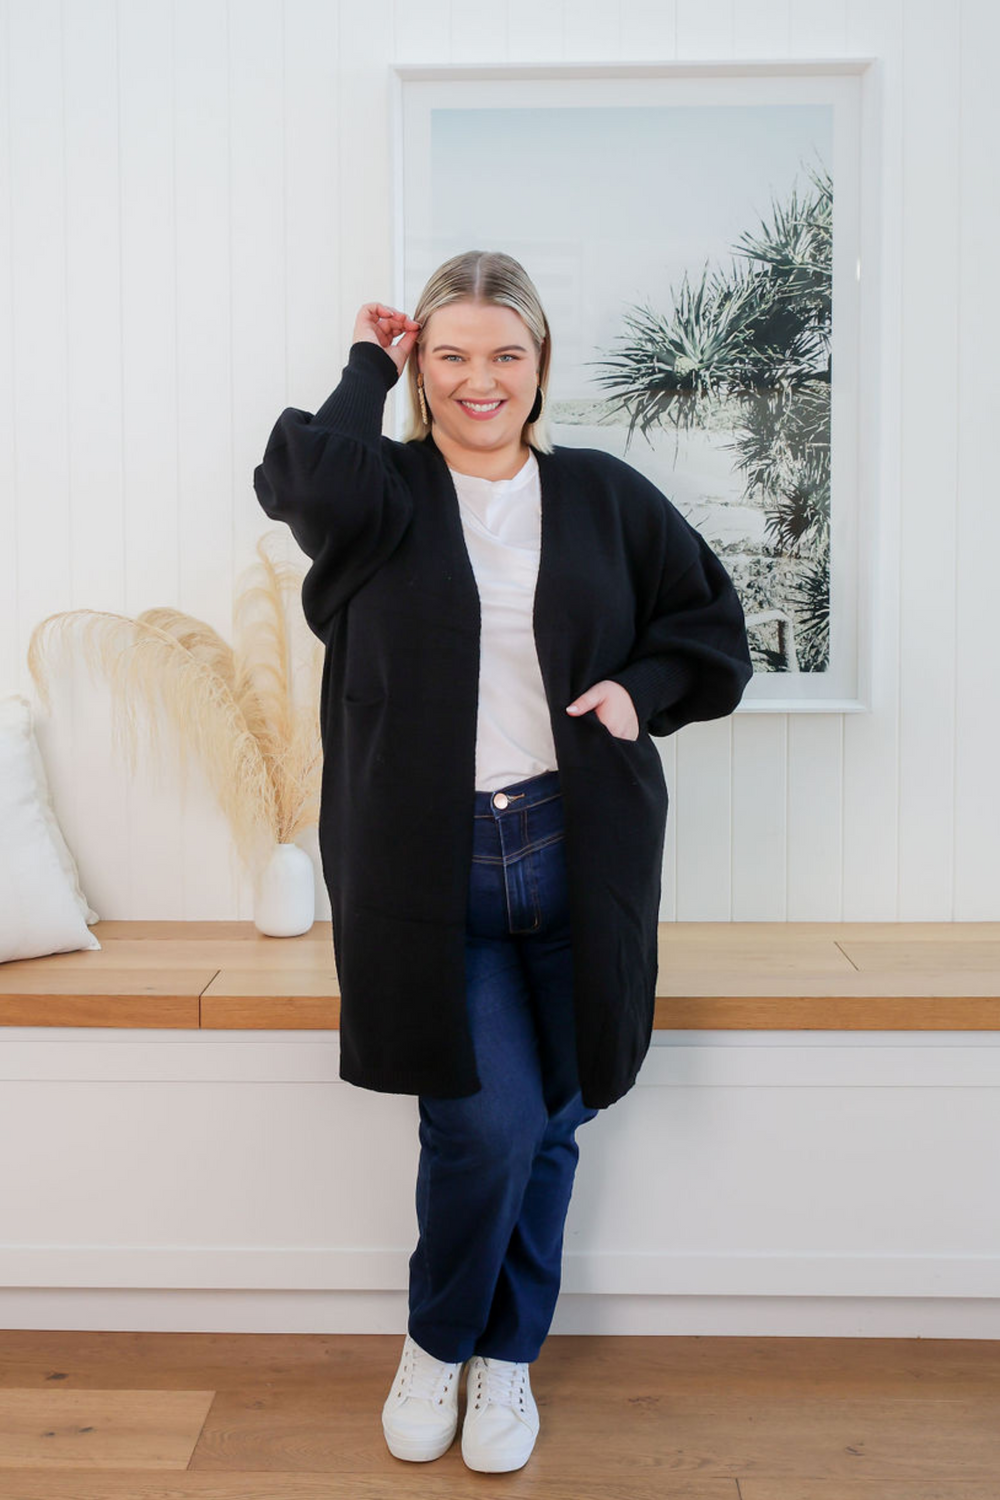 Ladies Cardigan - Black - Longline Cardigan - Funtional Front Pockets - Front Functional Pockets - Long Balloon Sleeve - Maya Cardigan Black Sizes L/XL Front Full Length View Paired With Carter Curve Dark Denim Jeans - Daisy's Closet